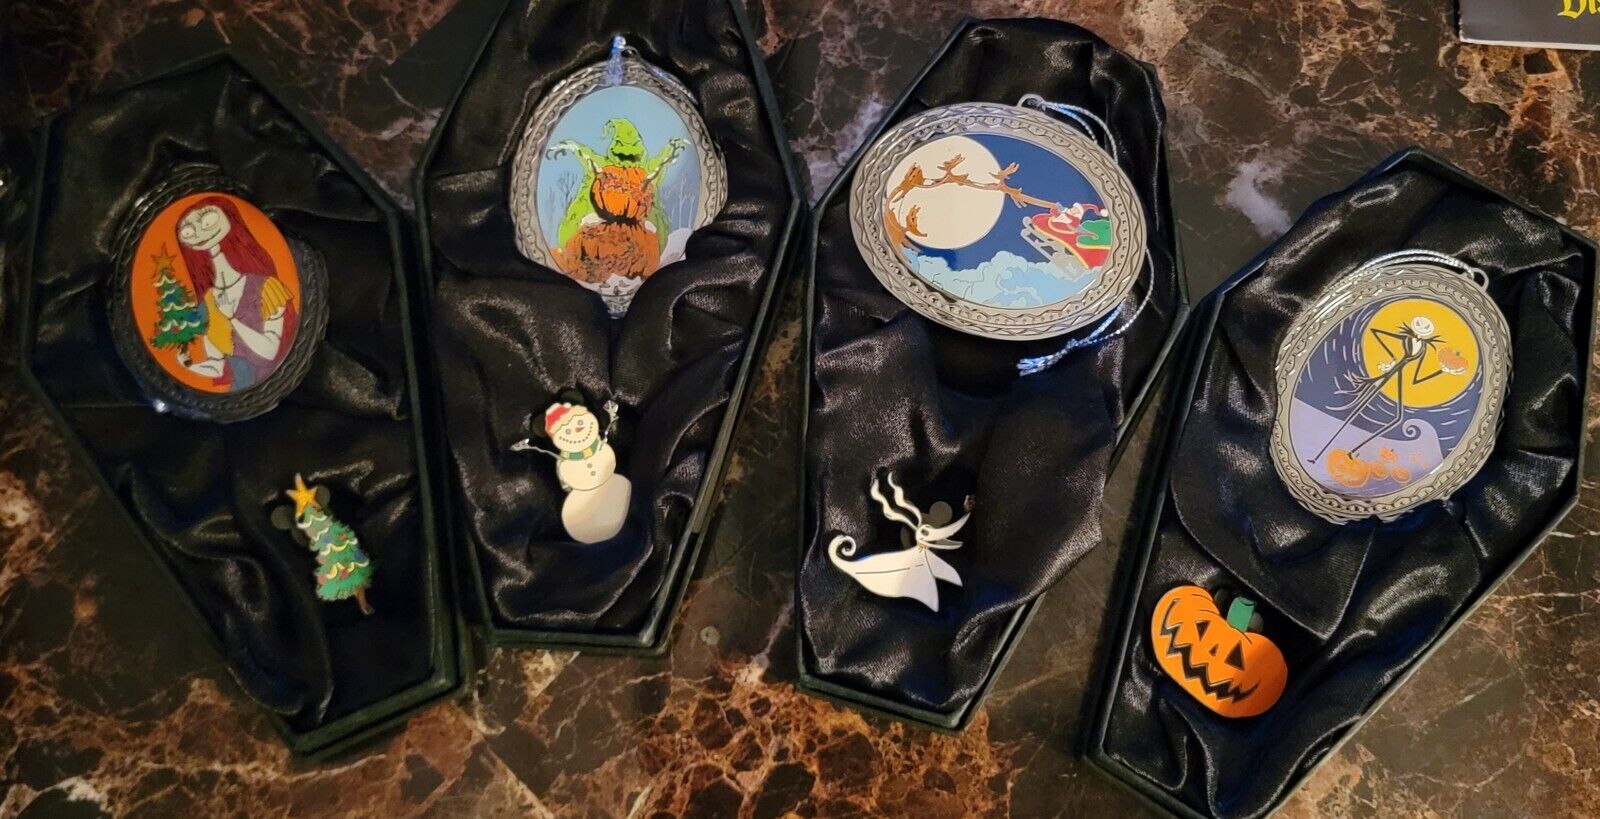 DLR - Haunted Mansion Holiday 4 PINS + 4 ORNAMENTS 2003 HAUNTED  MANSION EVENT